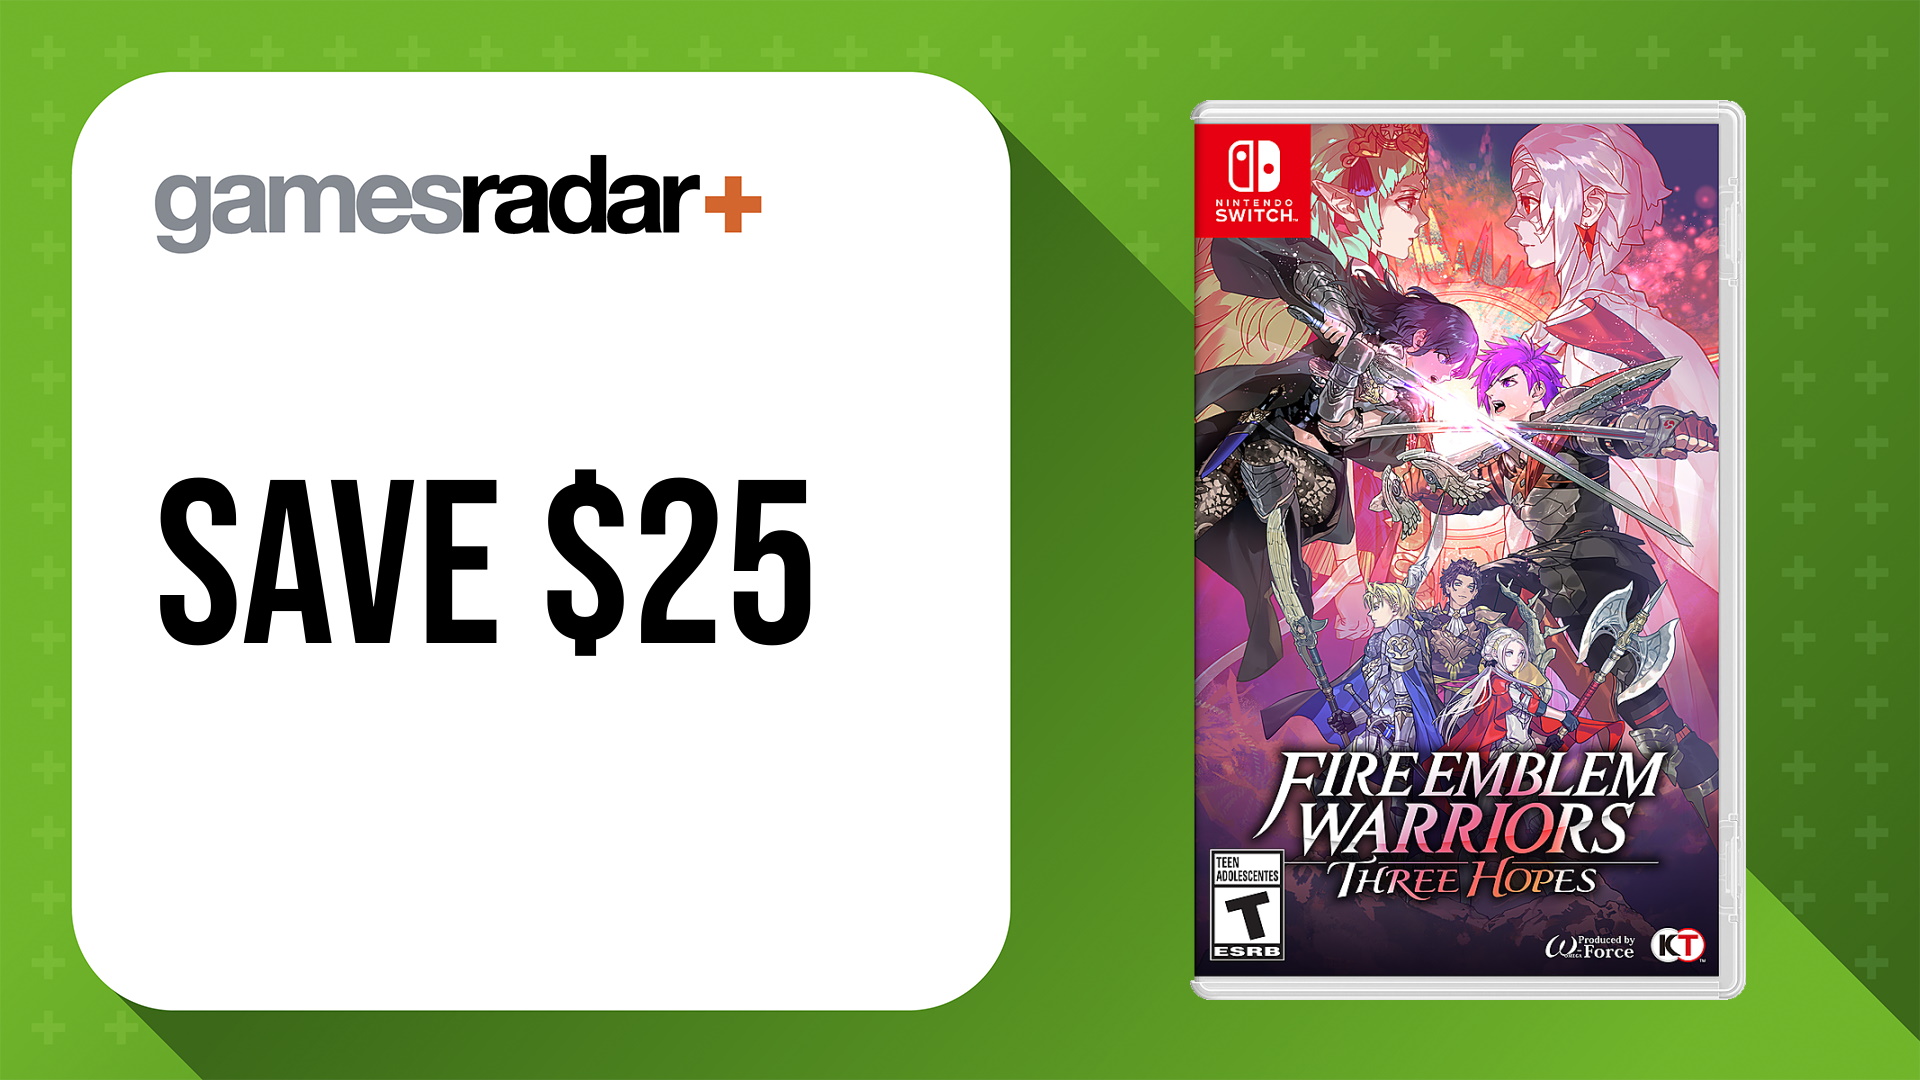 Fire Emblem Warriors: Three Hopes Nintendo Switch box art on a green background with sale information